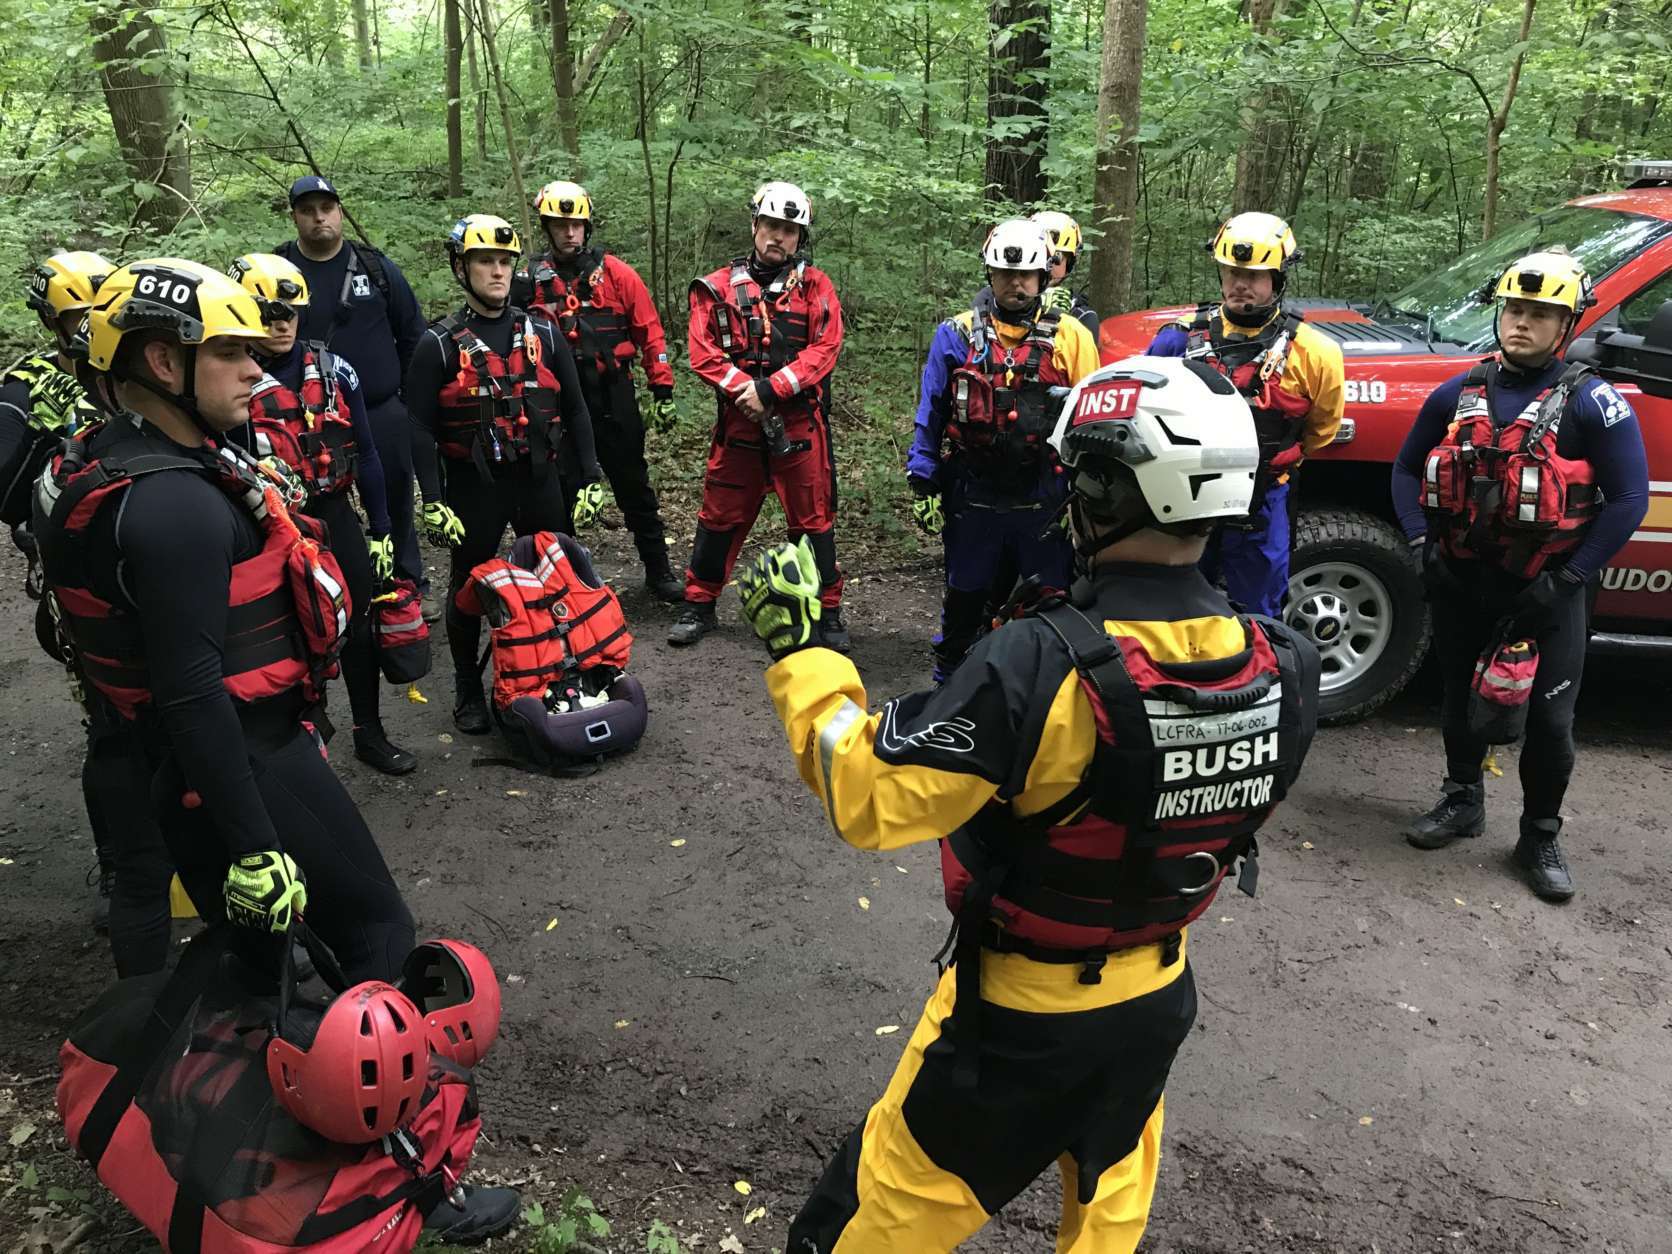 Members of the Loudoun County swift water rescue team get a briefing before starting a training session Friday in the Potomac River.  (WTOP/Michelle Basch)